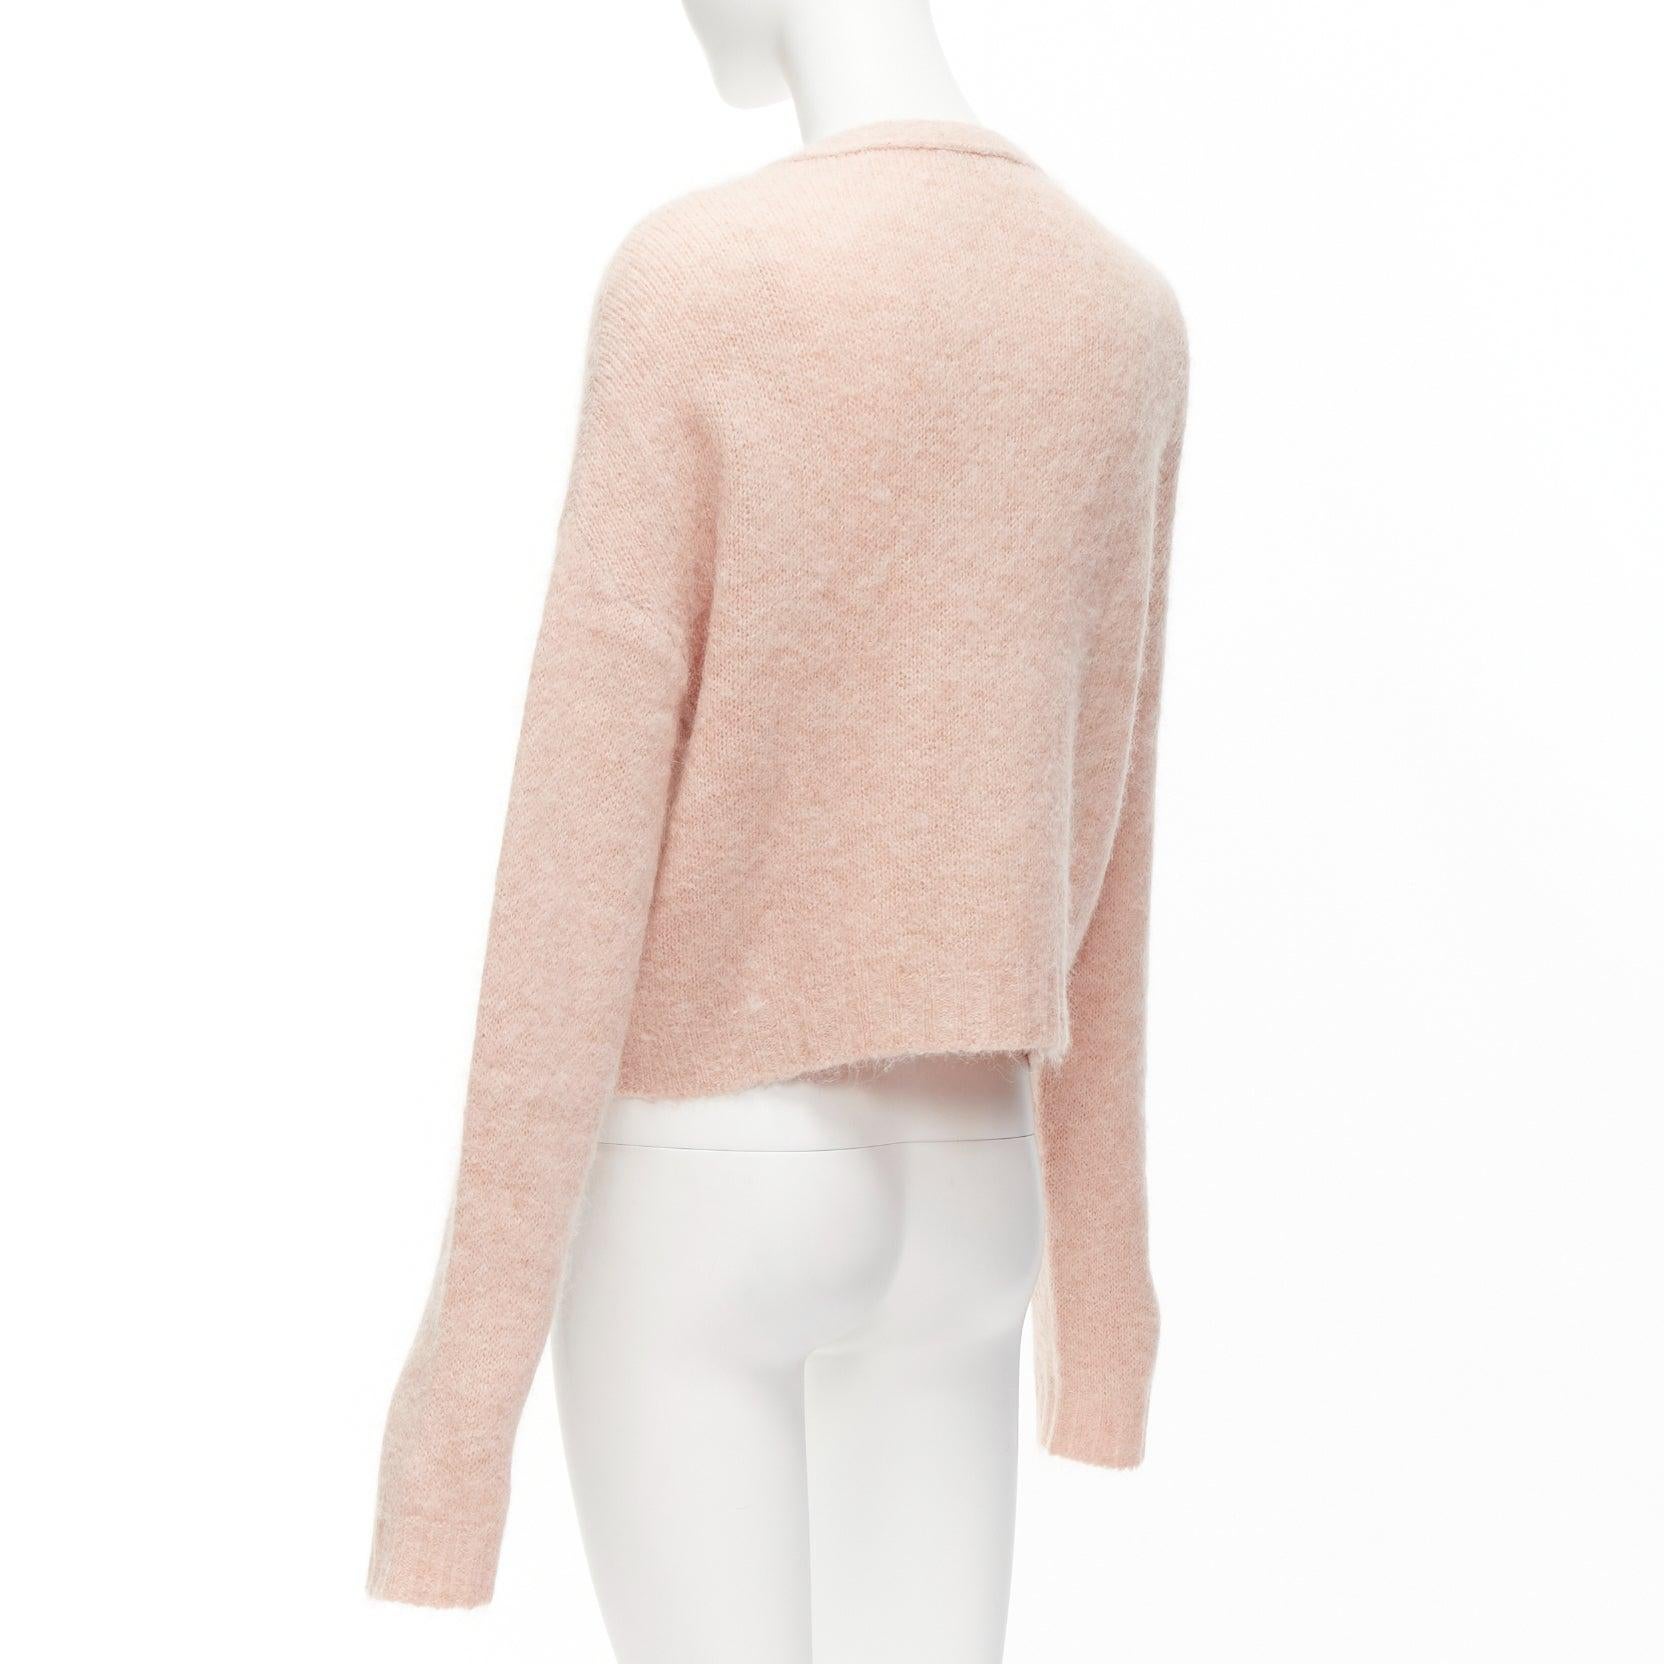 RED VALENTINO pink alpaca blend horn button cardigan sweater XS For Sale 4